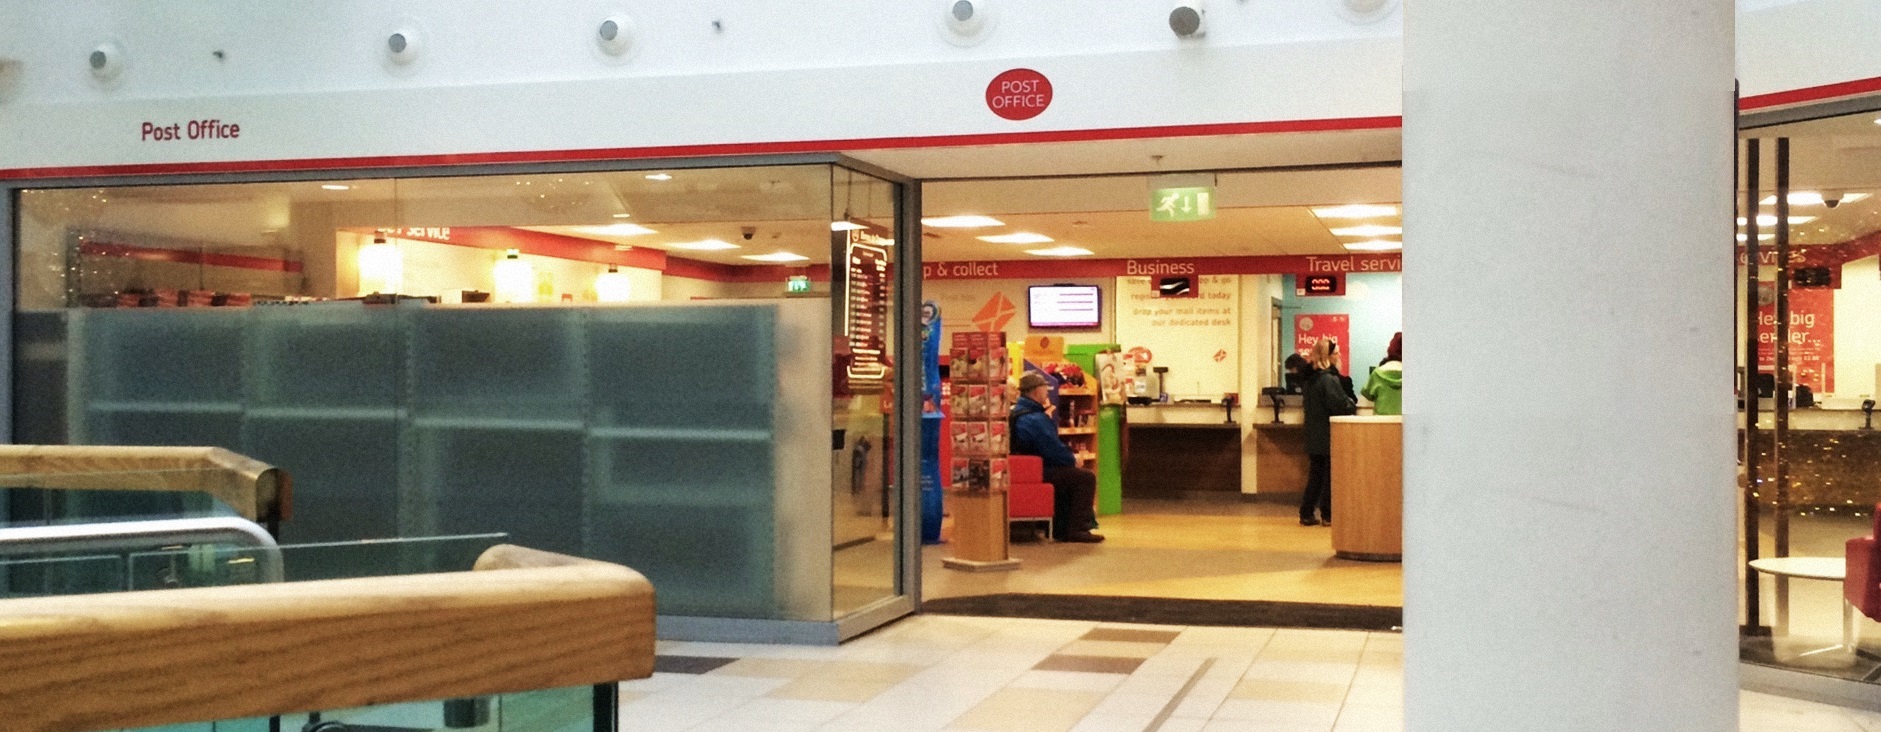 Picture of the Post office - Princes Mall - Euan's Guide Banner